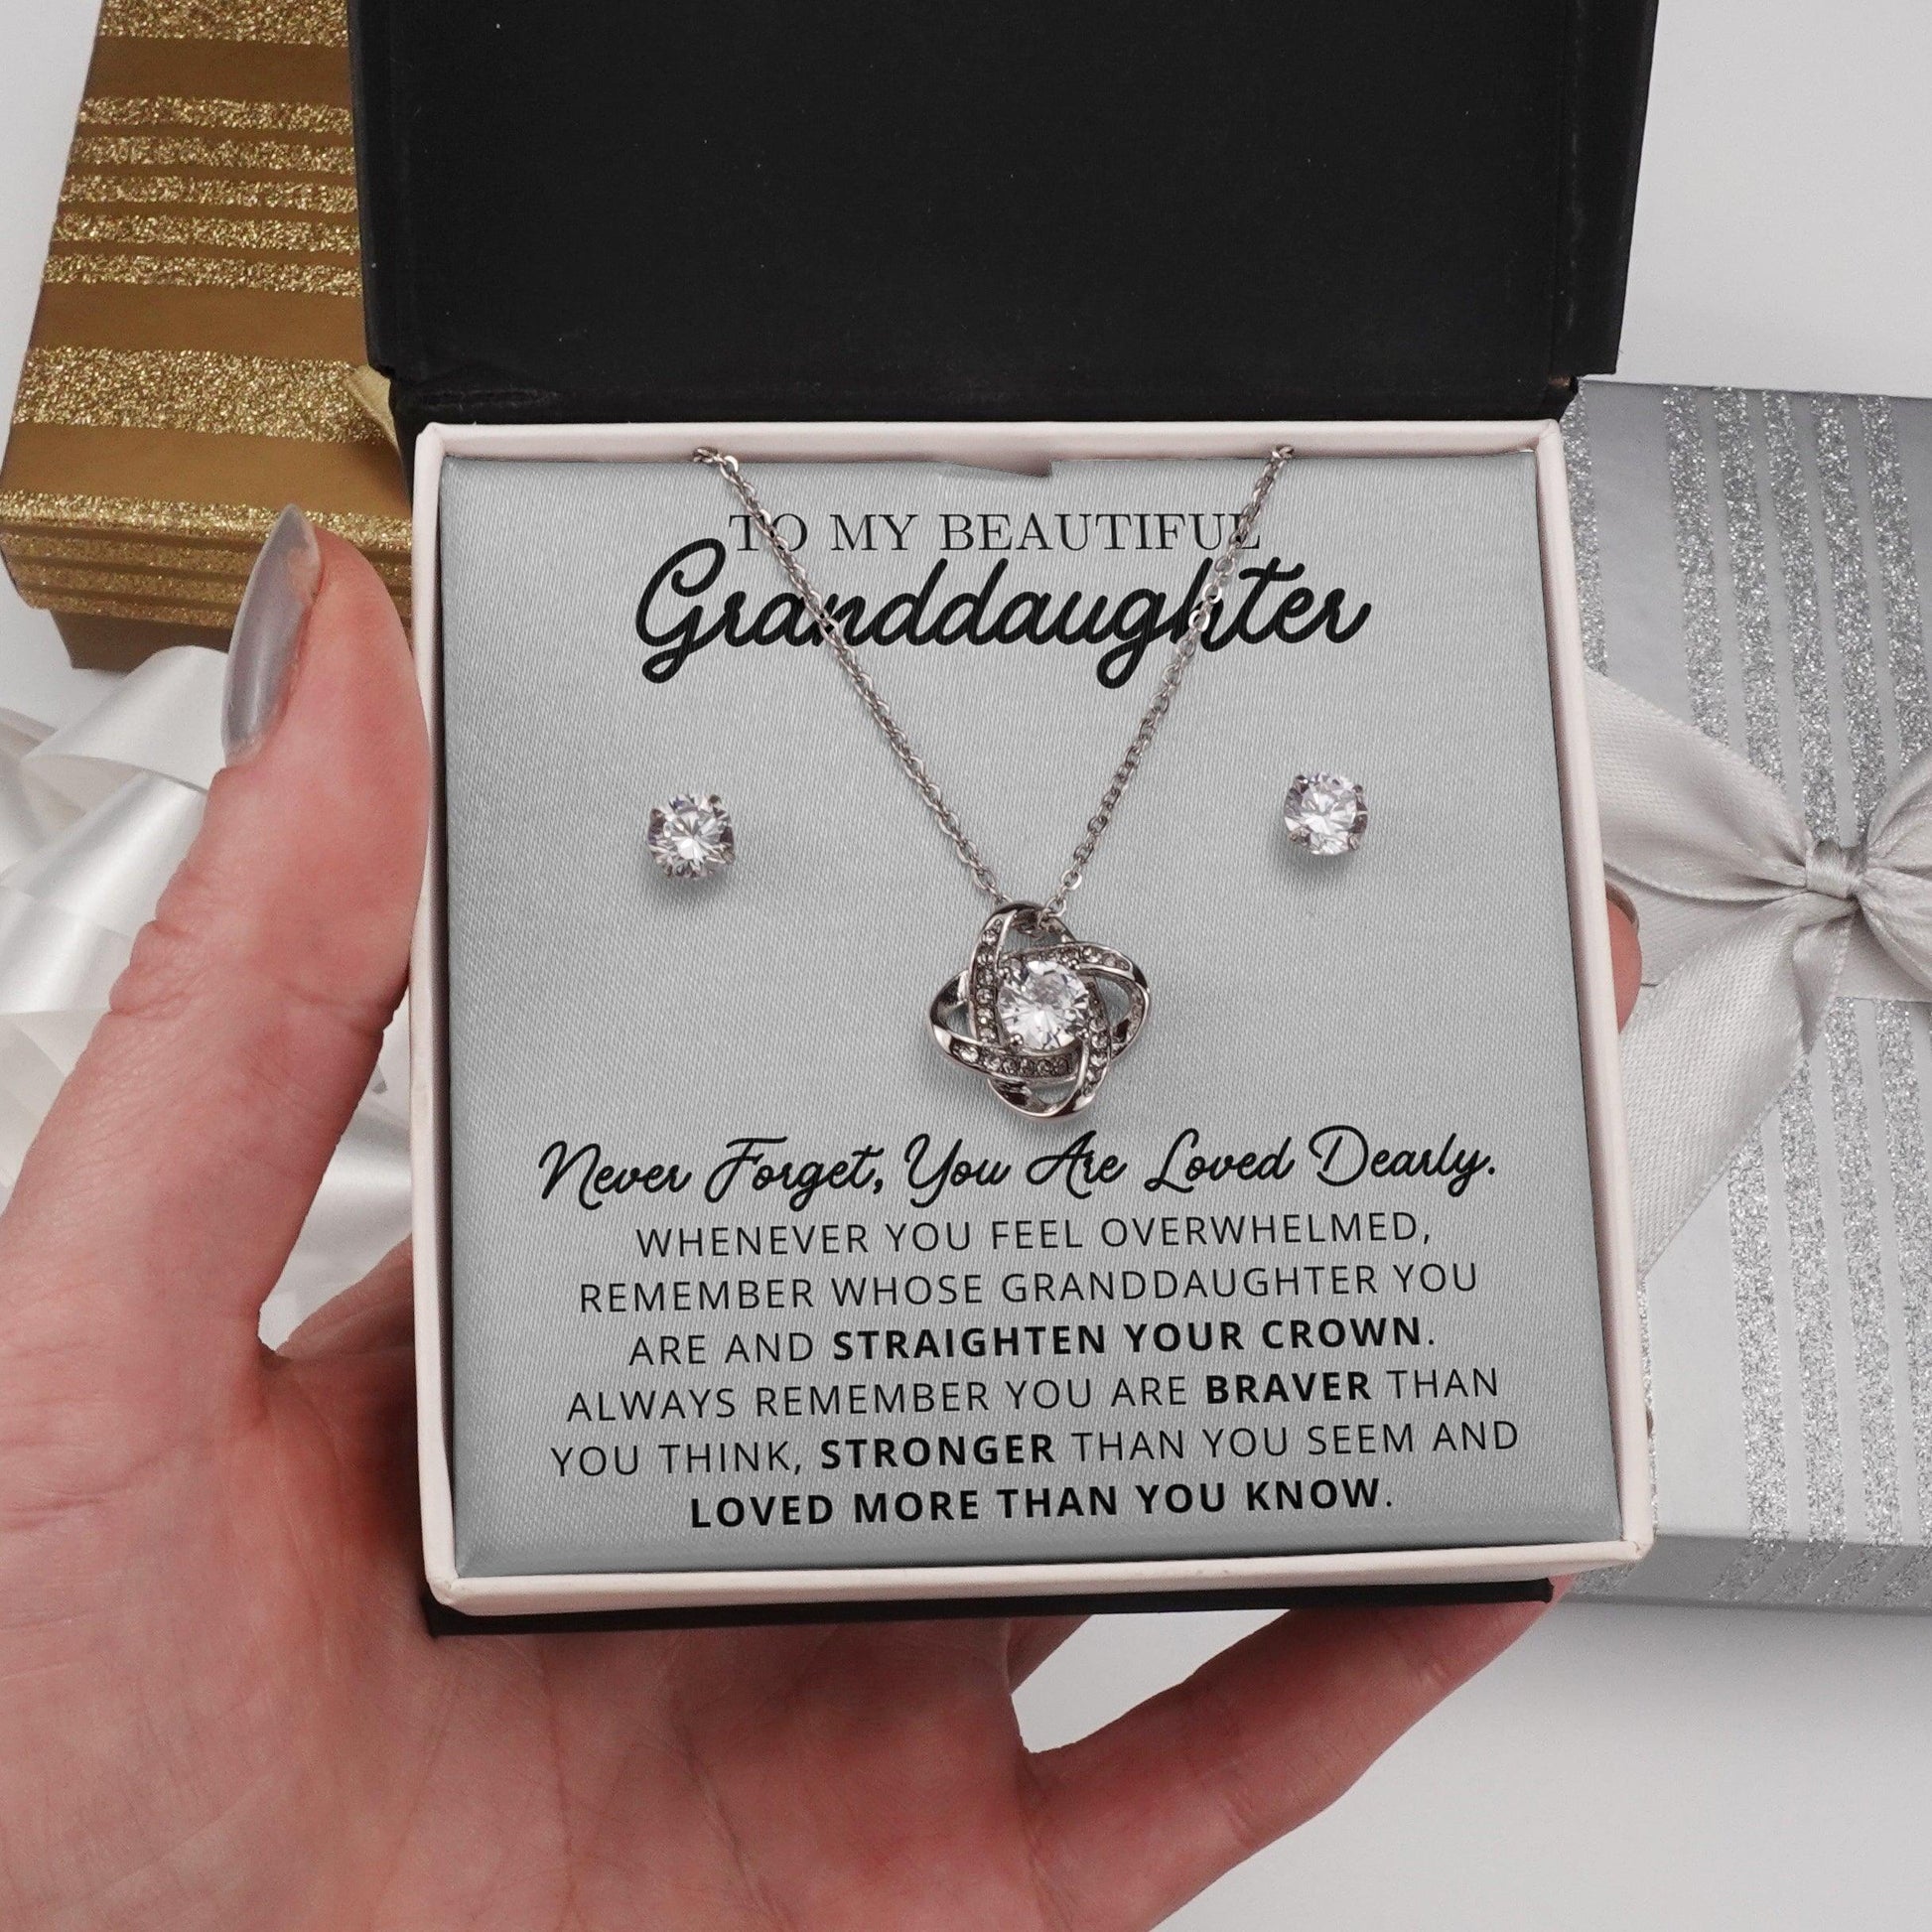 Jewelry gifts Granddaughter -  Loved Dearly - LK Love Set - Belesmé - Memorable Jewelry Gifts 